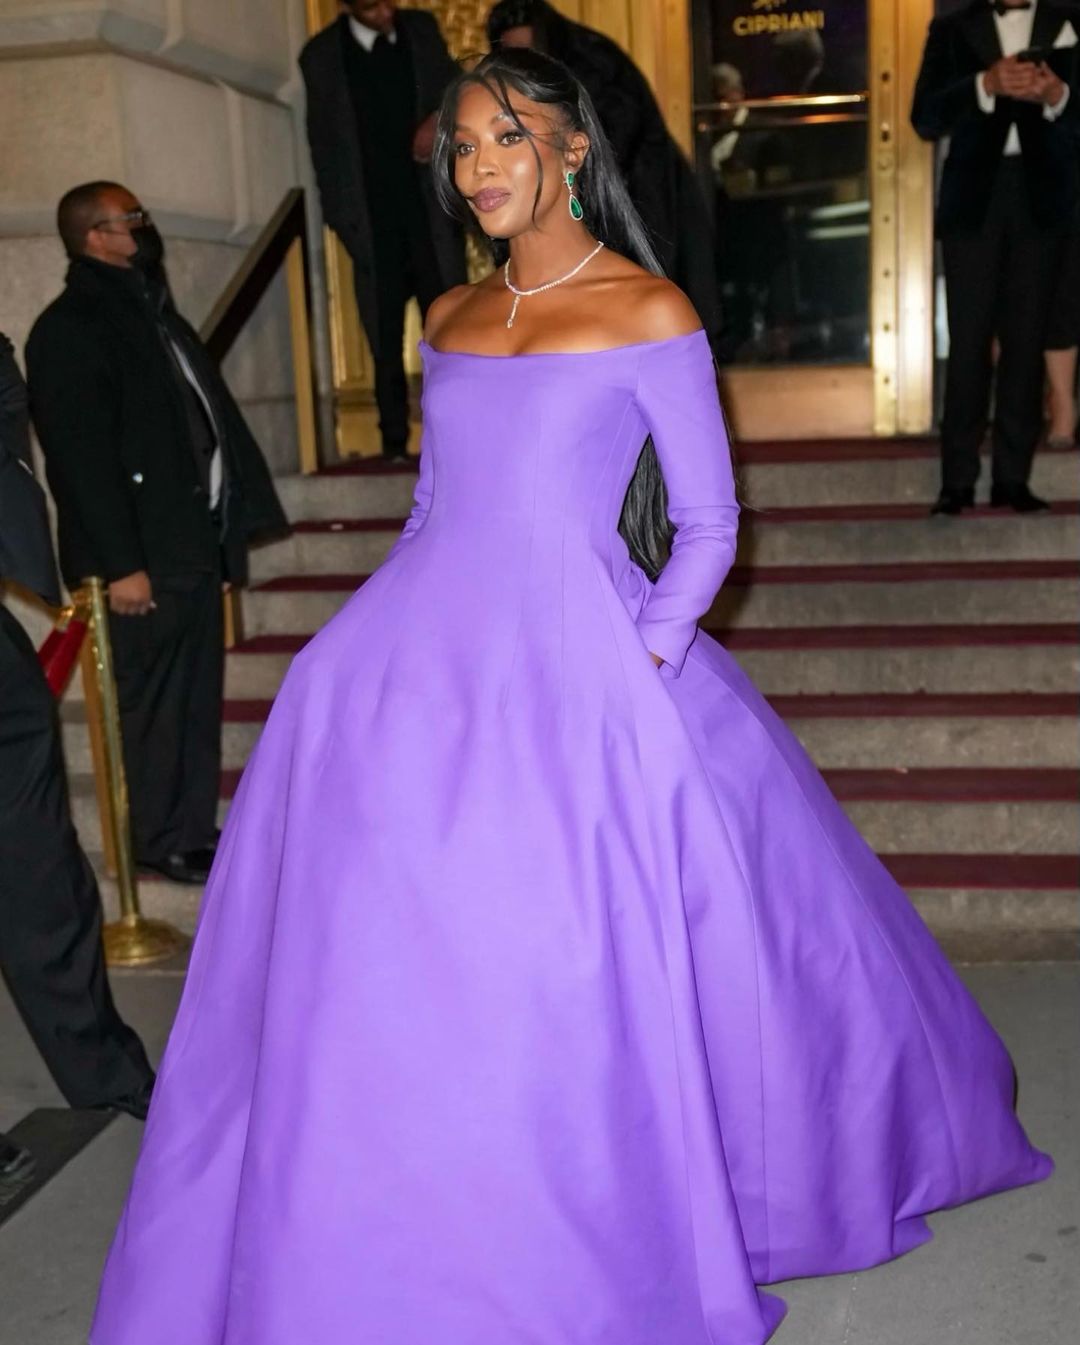 Naomi posted a photo from an award show. The super-model looks stunning in a purple ball gown